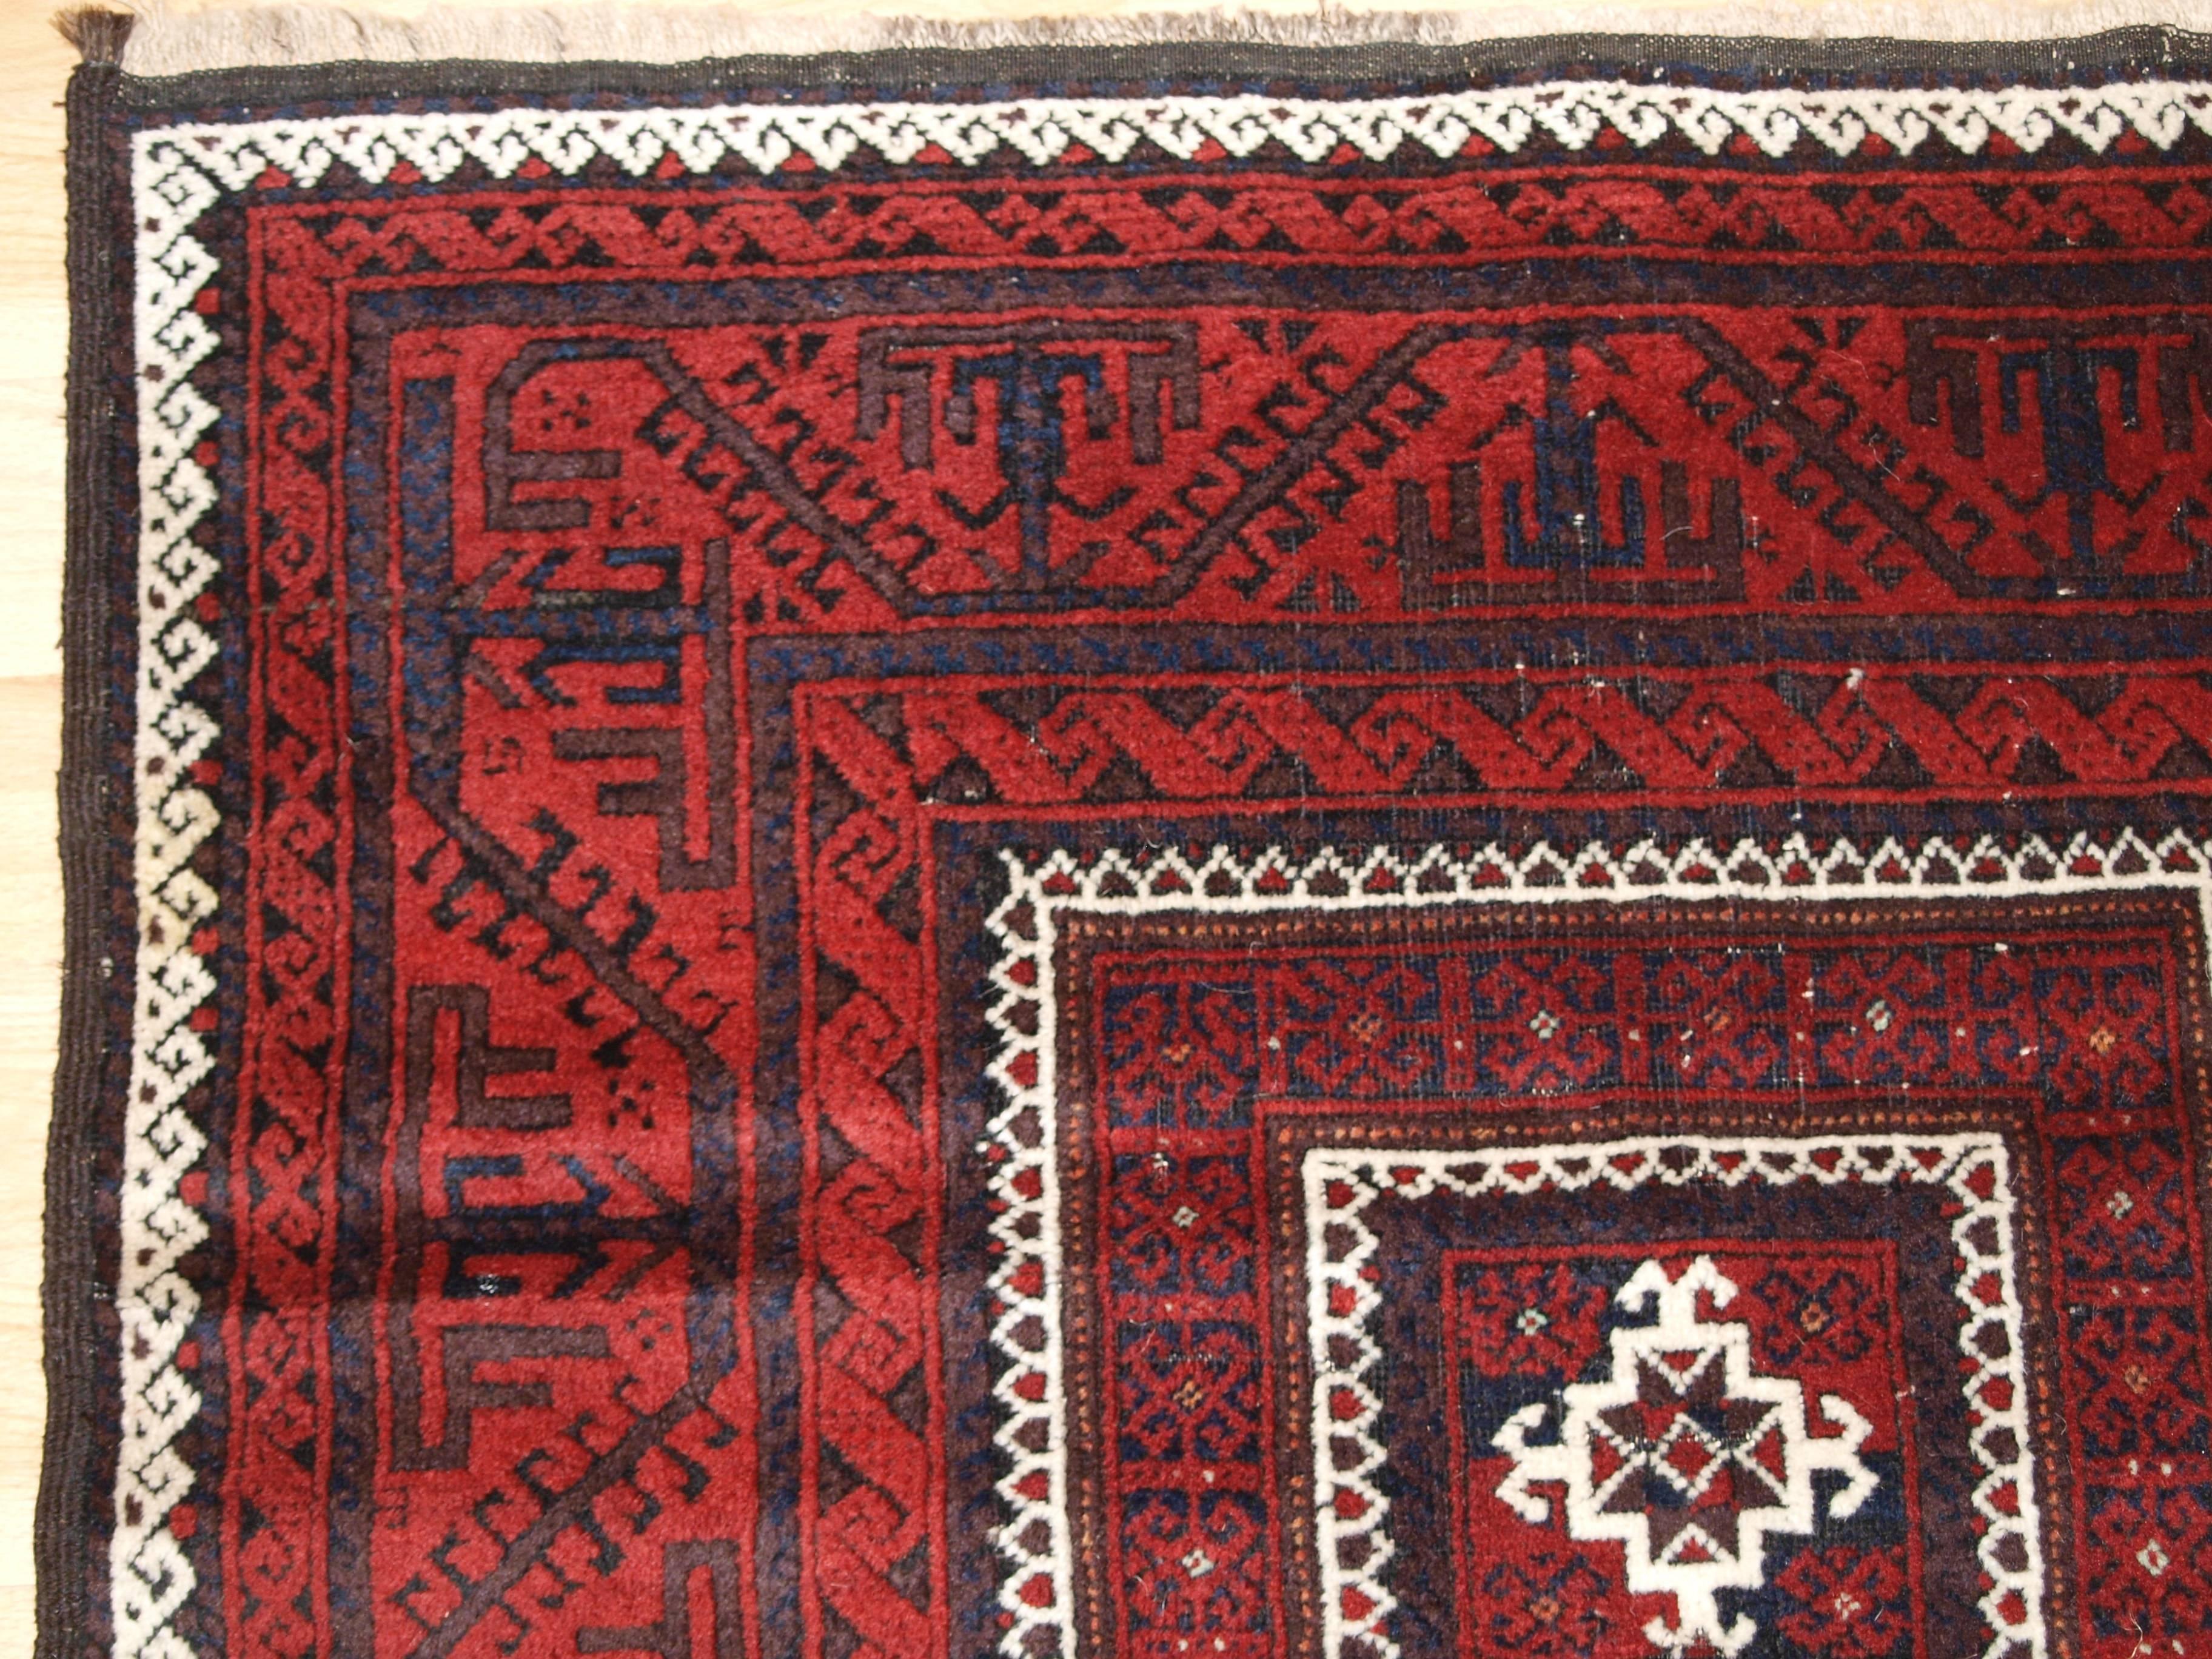 Central Asian Antique Baluch Rug with Unusual Three Compartment Design, circa 1900 For Sale